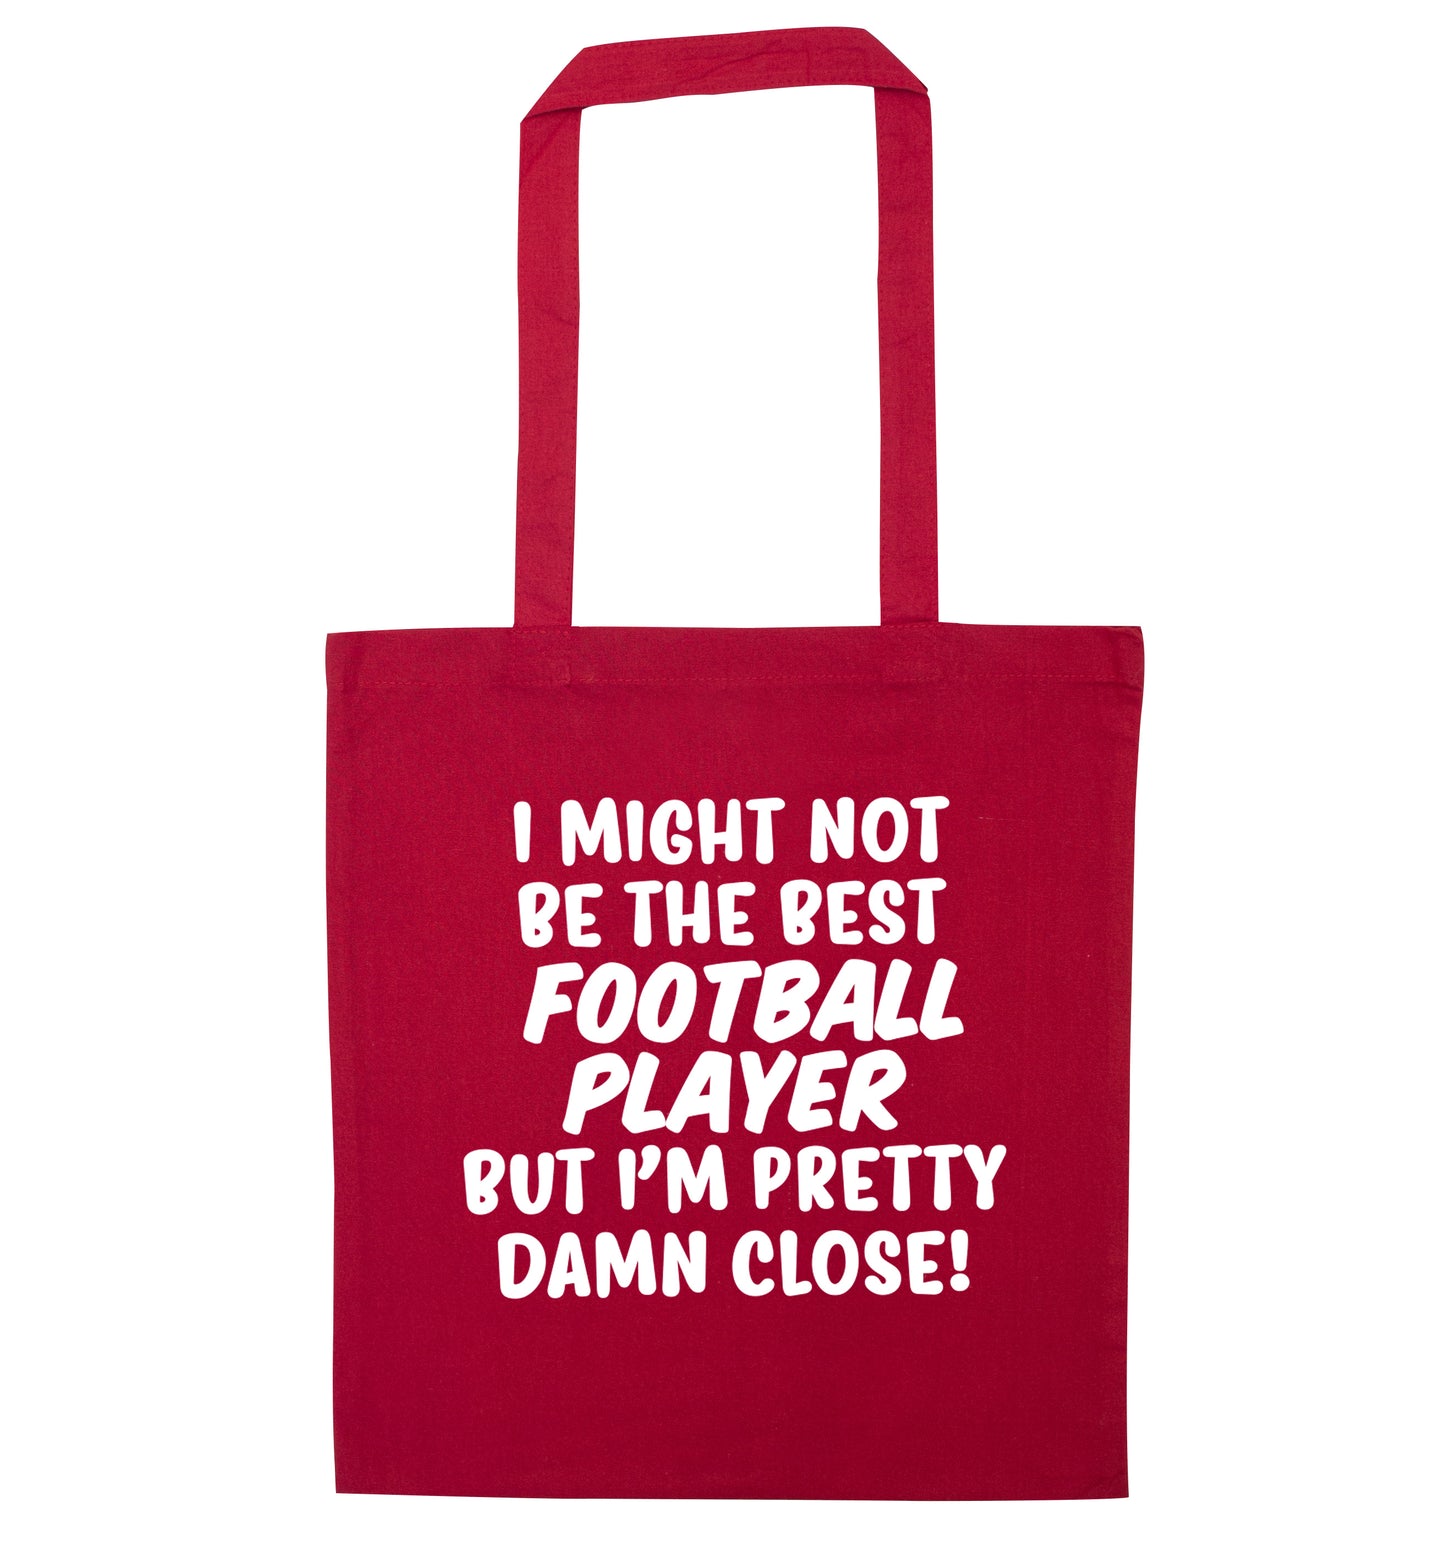 I might not be the best football player but I'm pretty close! red tote bag